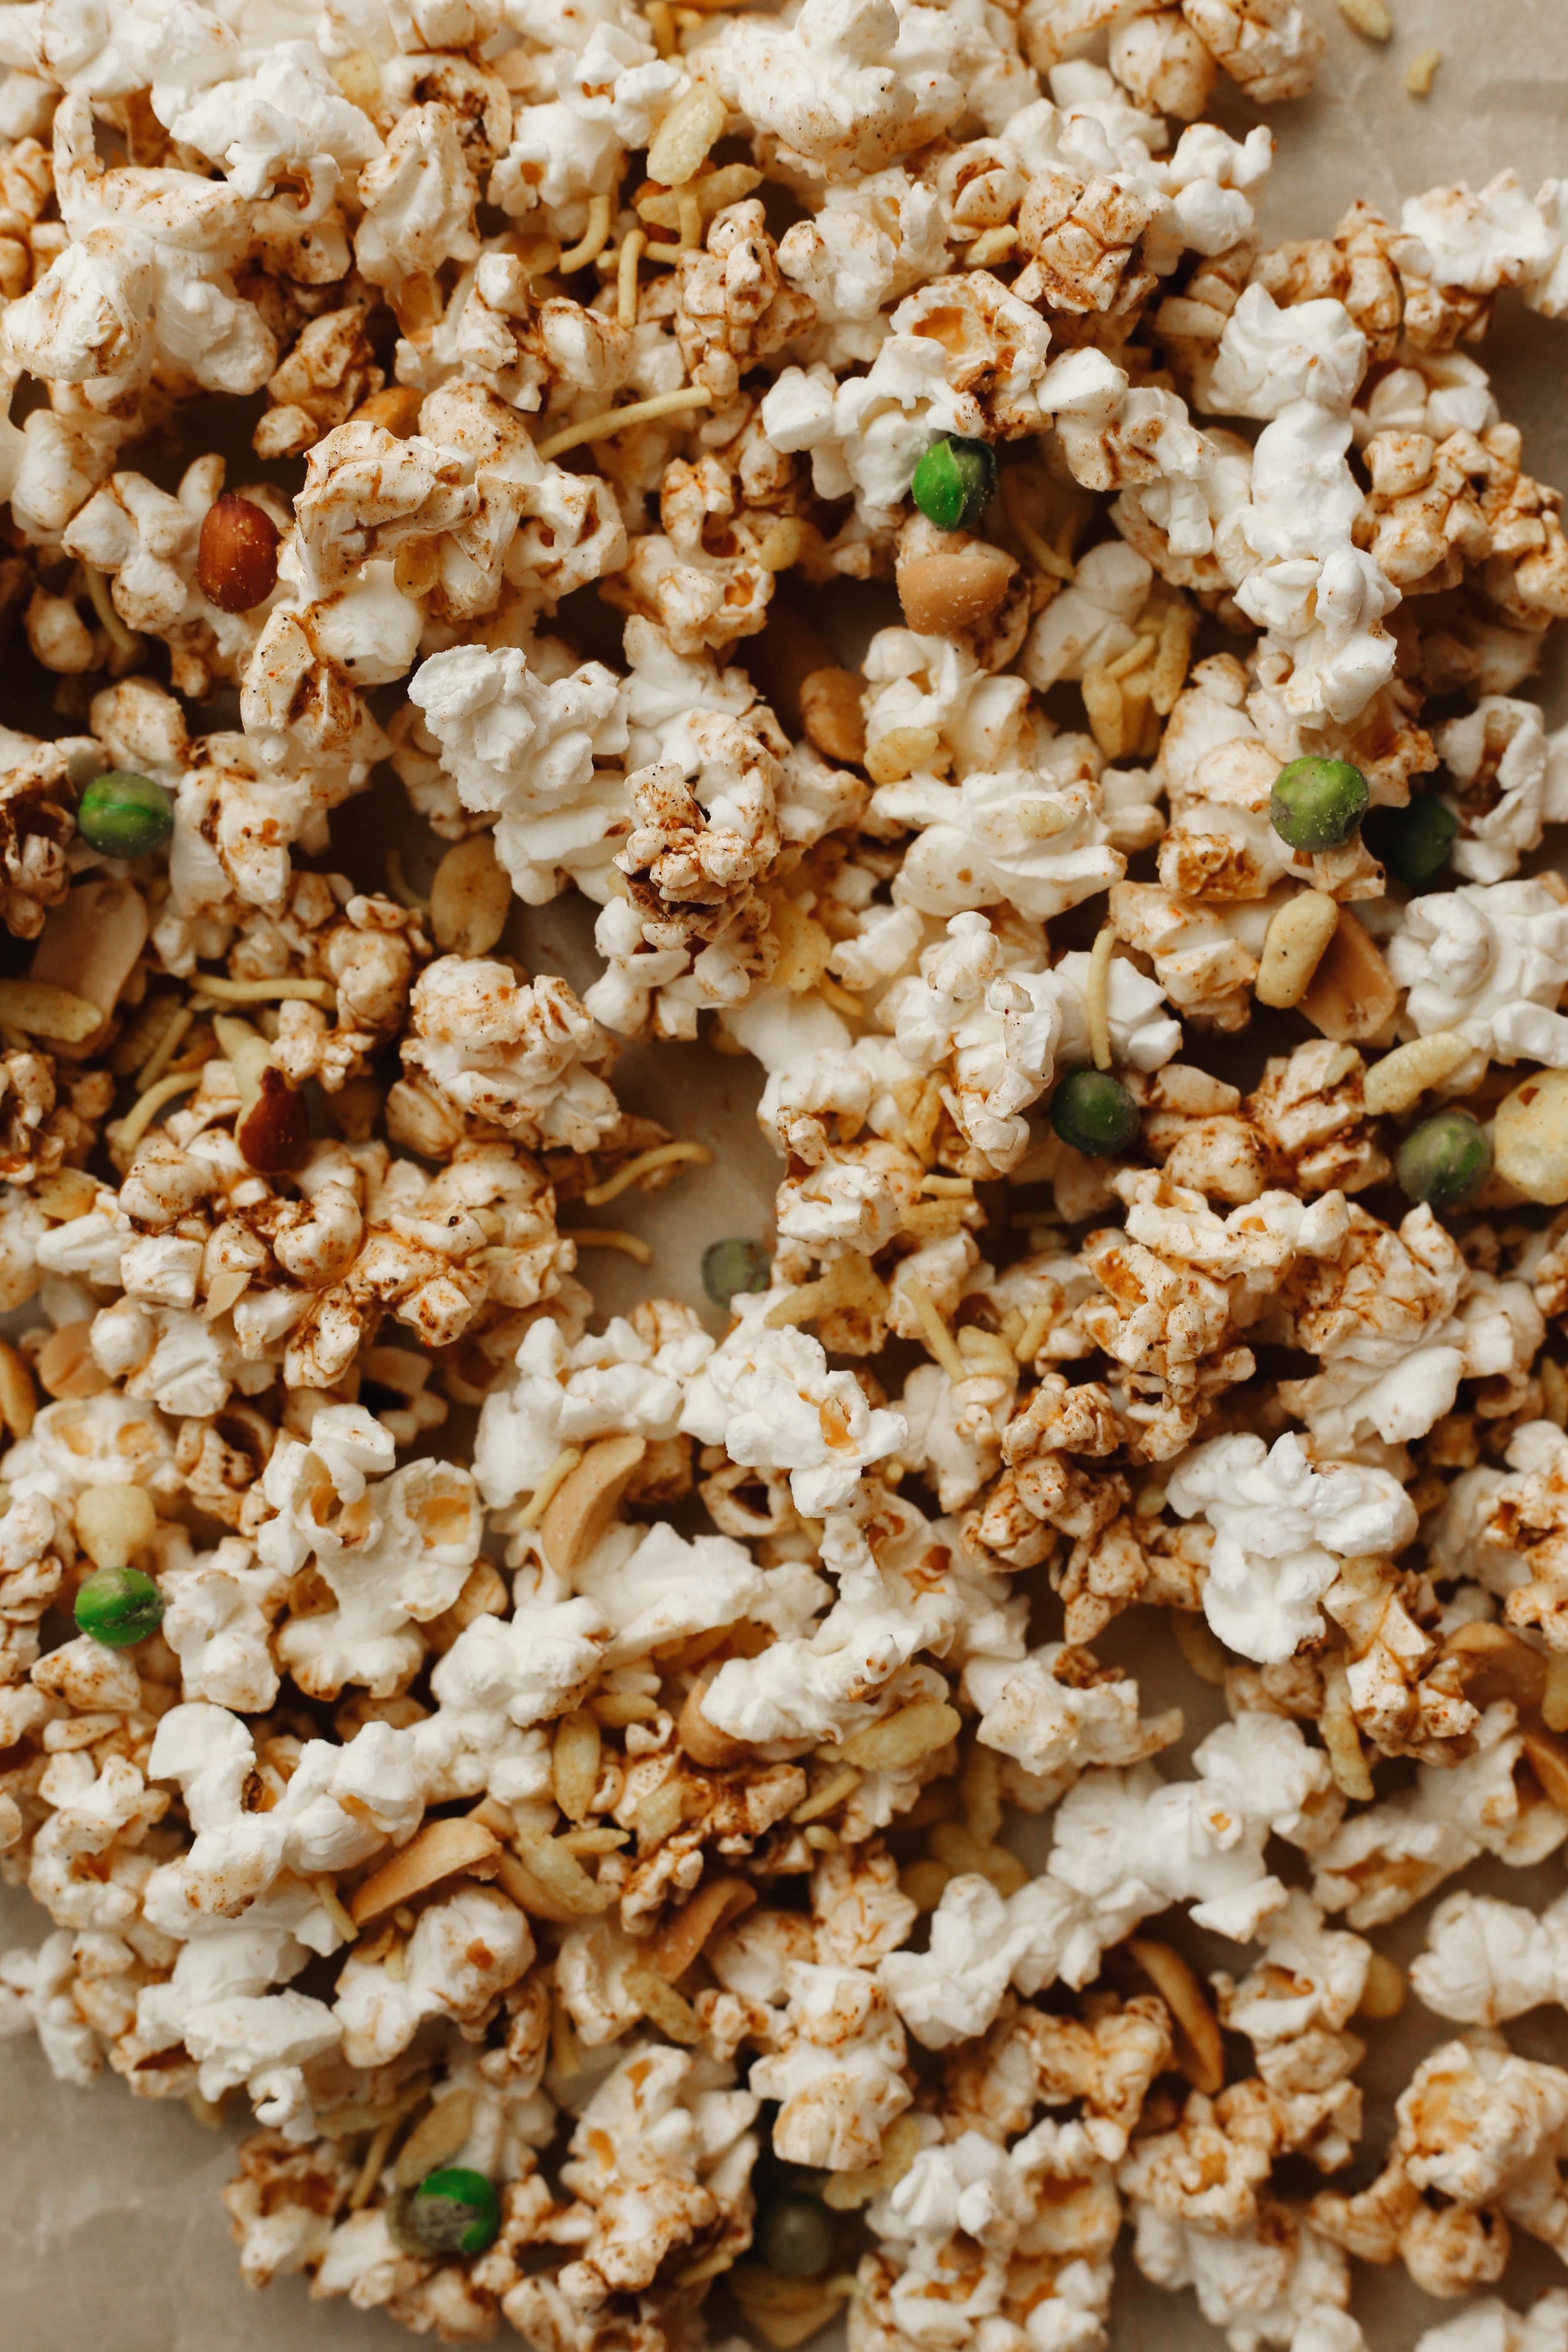 3 easy ways to dress up your popcorn